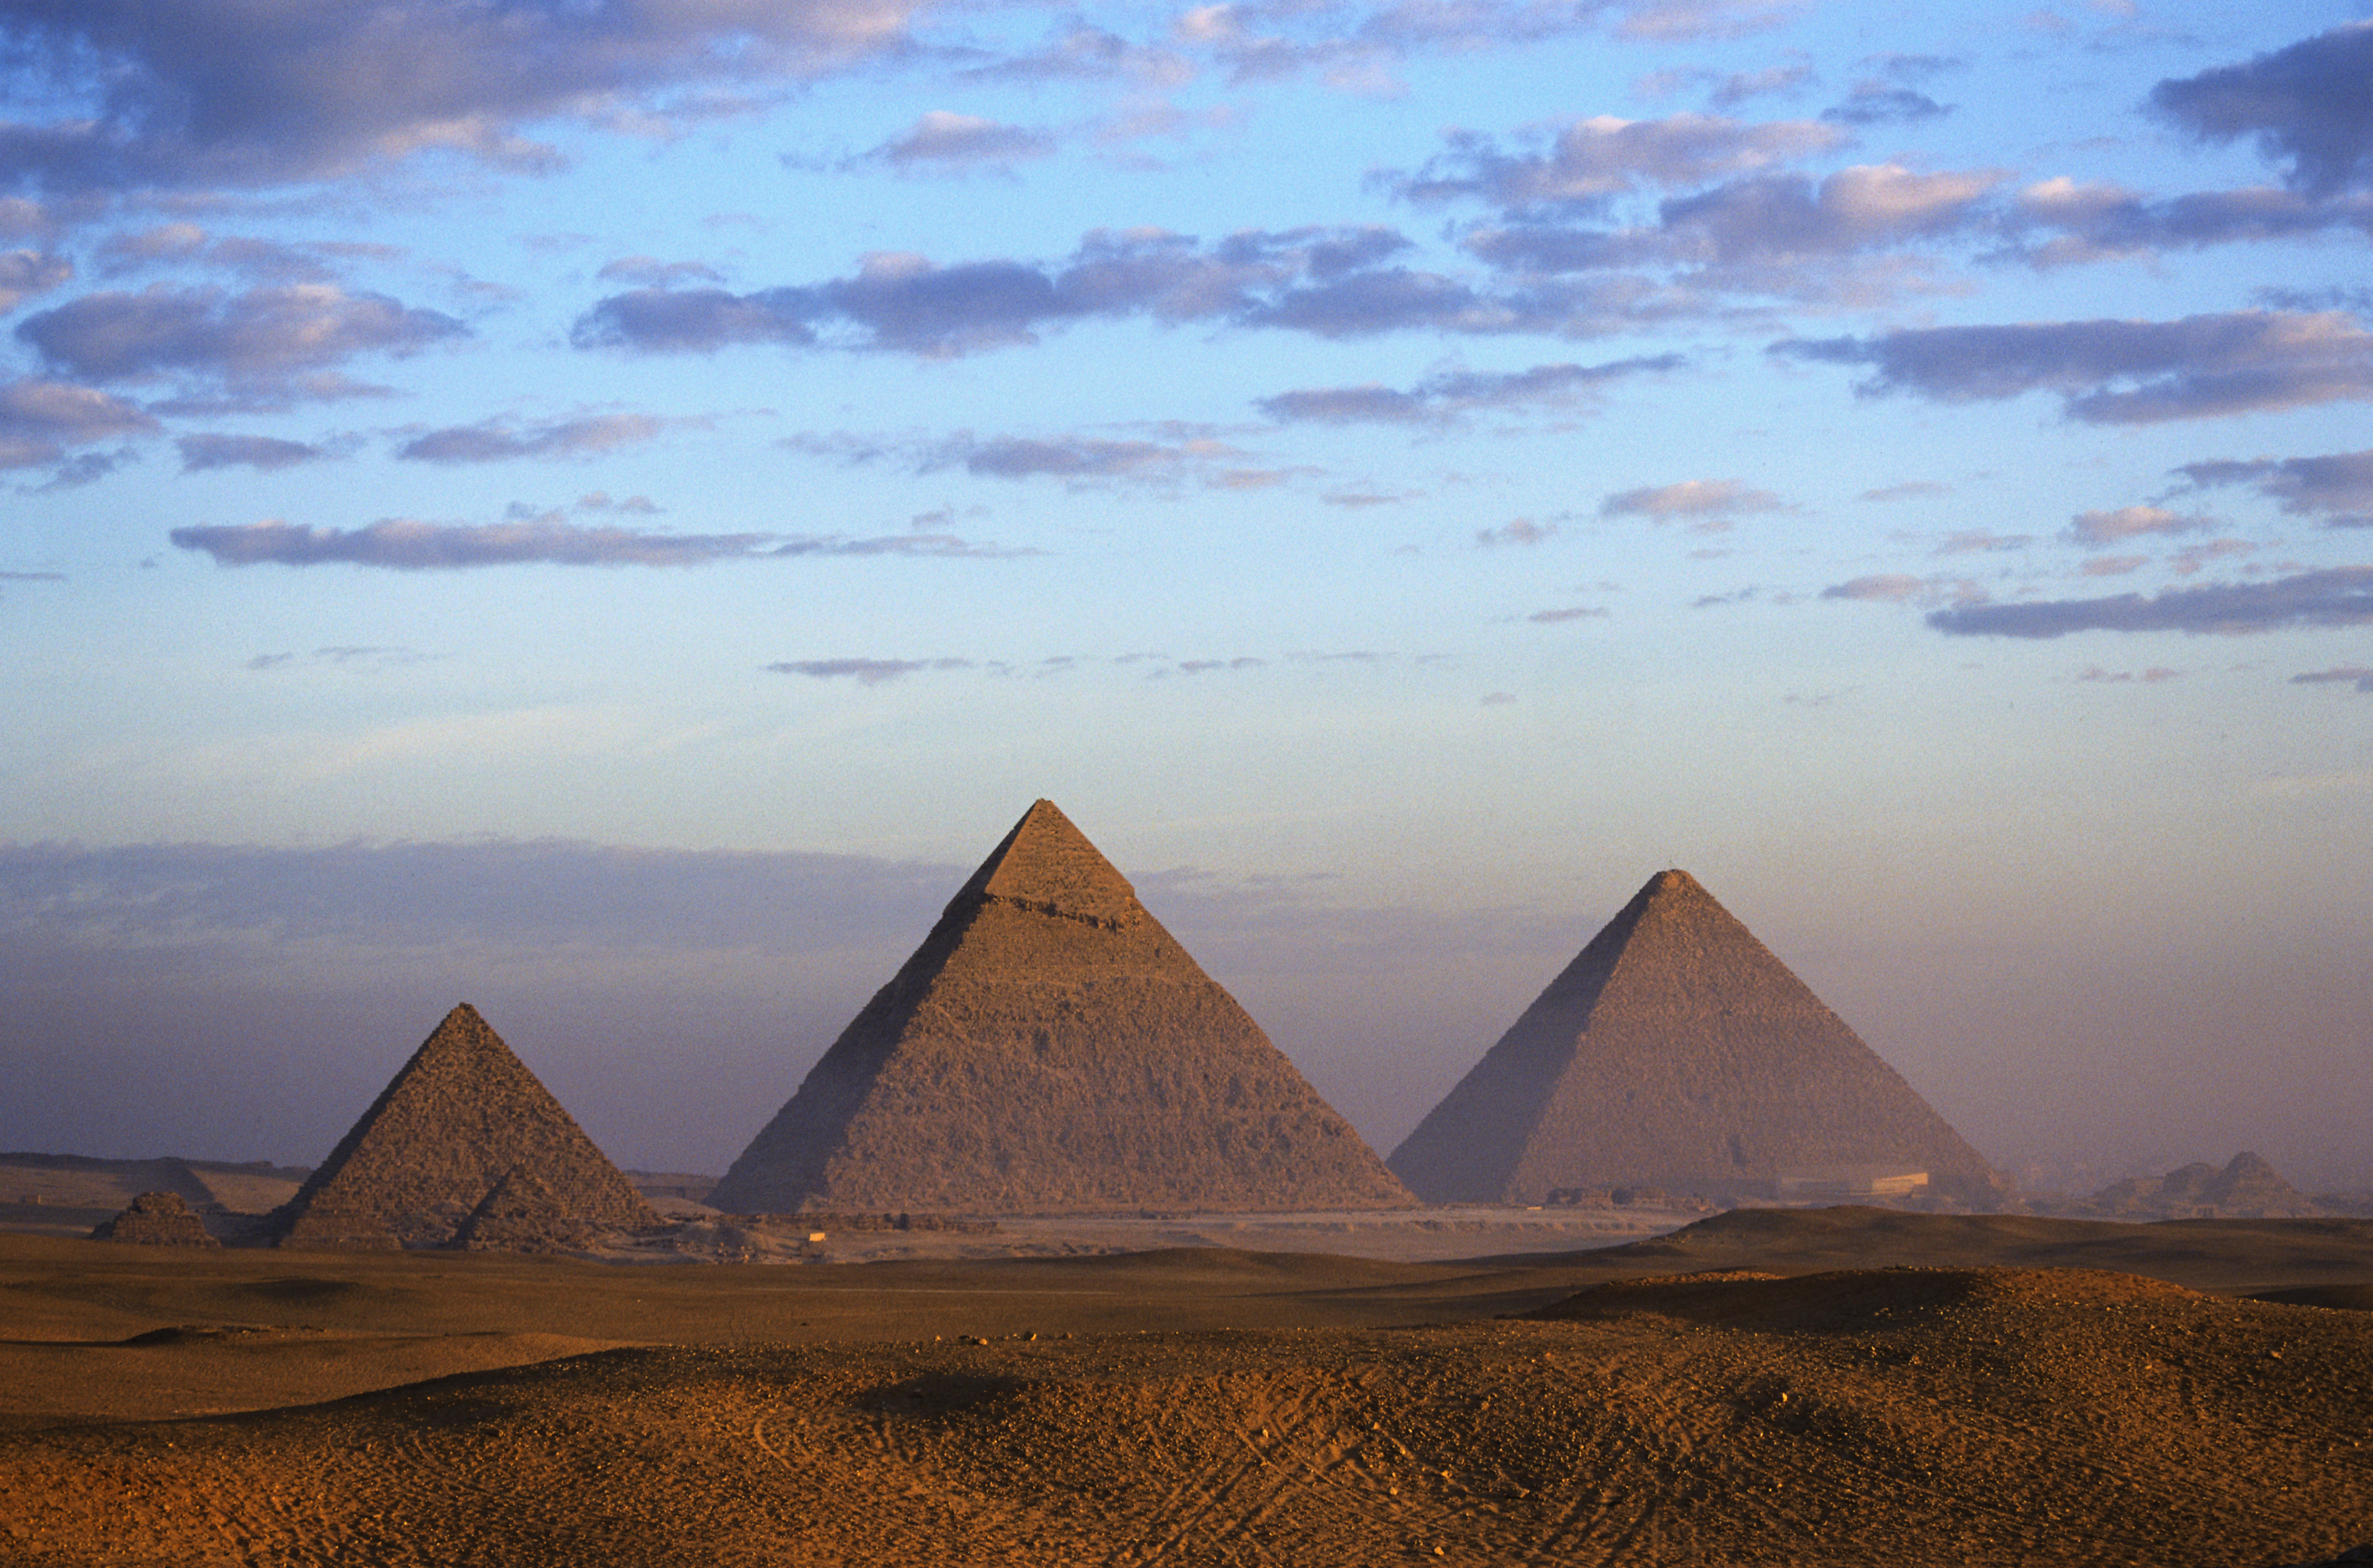 Egyptian Pyramids Pictures - Ancient Egypt - HISTORY.com